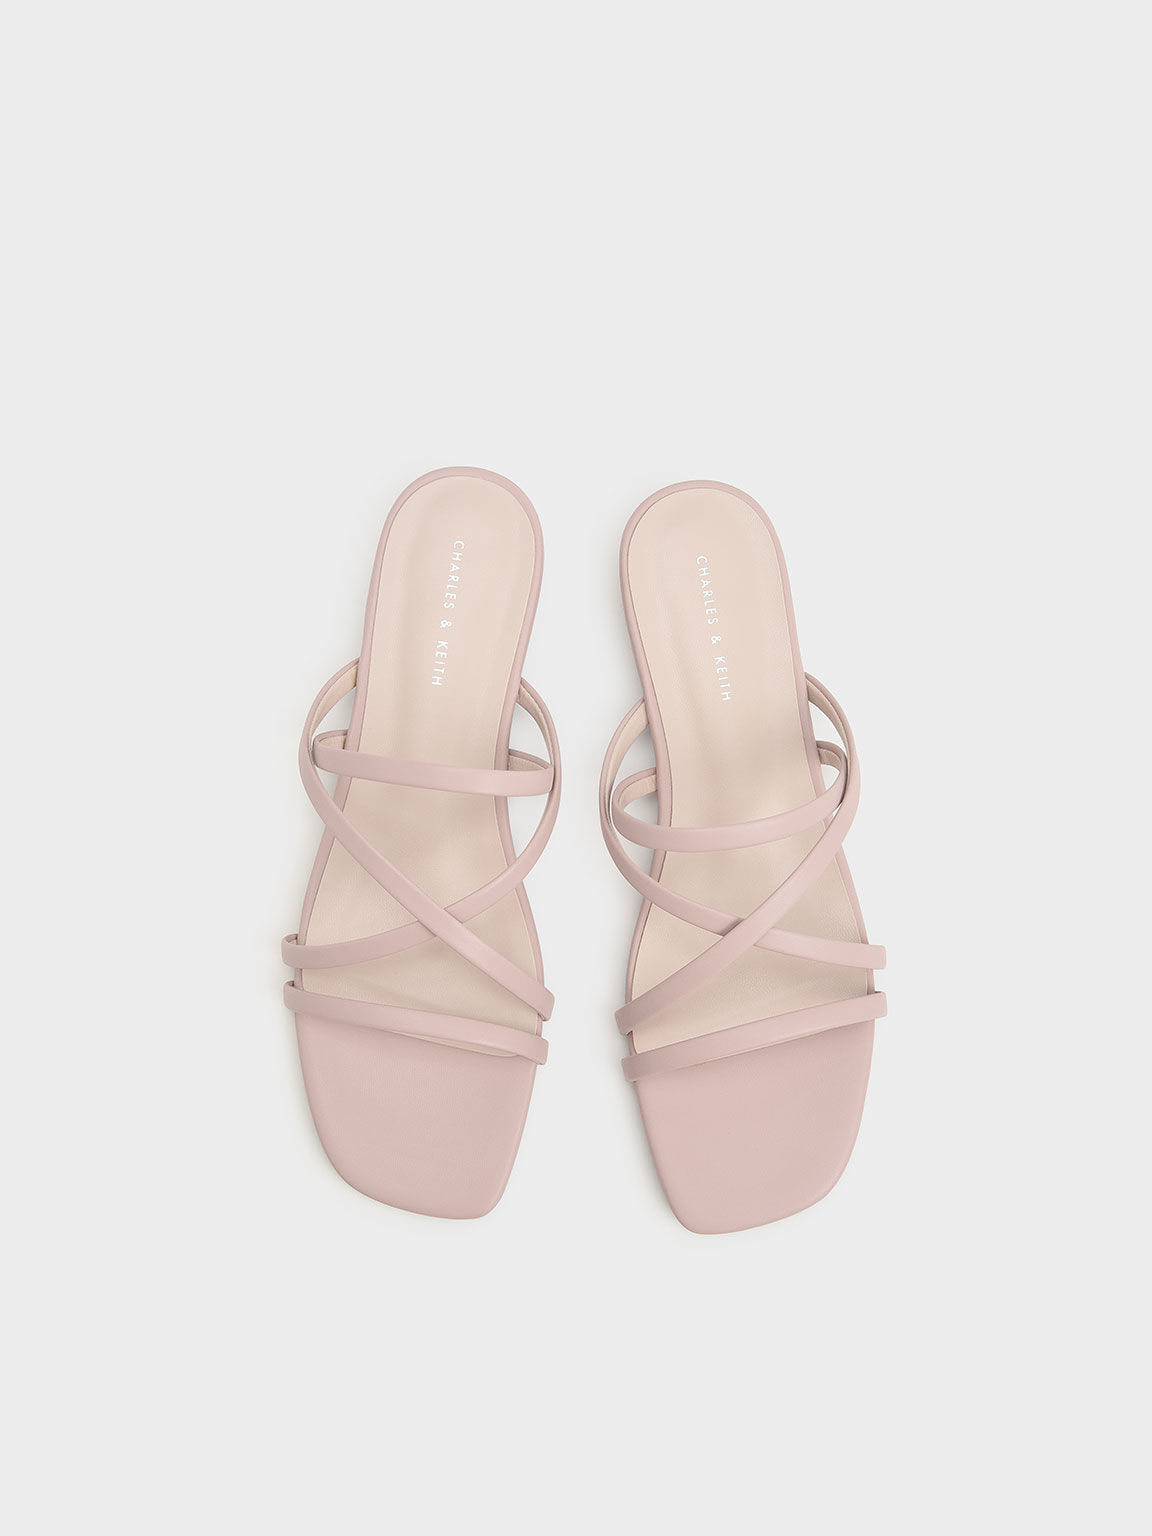 Light Pink Strappy Sculptural Heel Sandals - CHARLES & KEITH TH